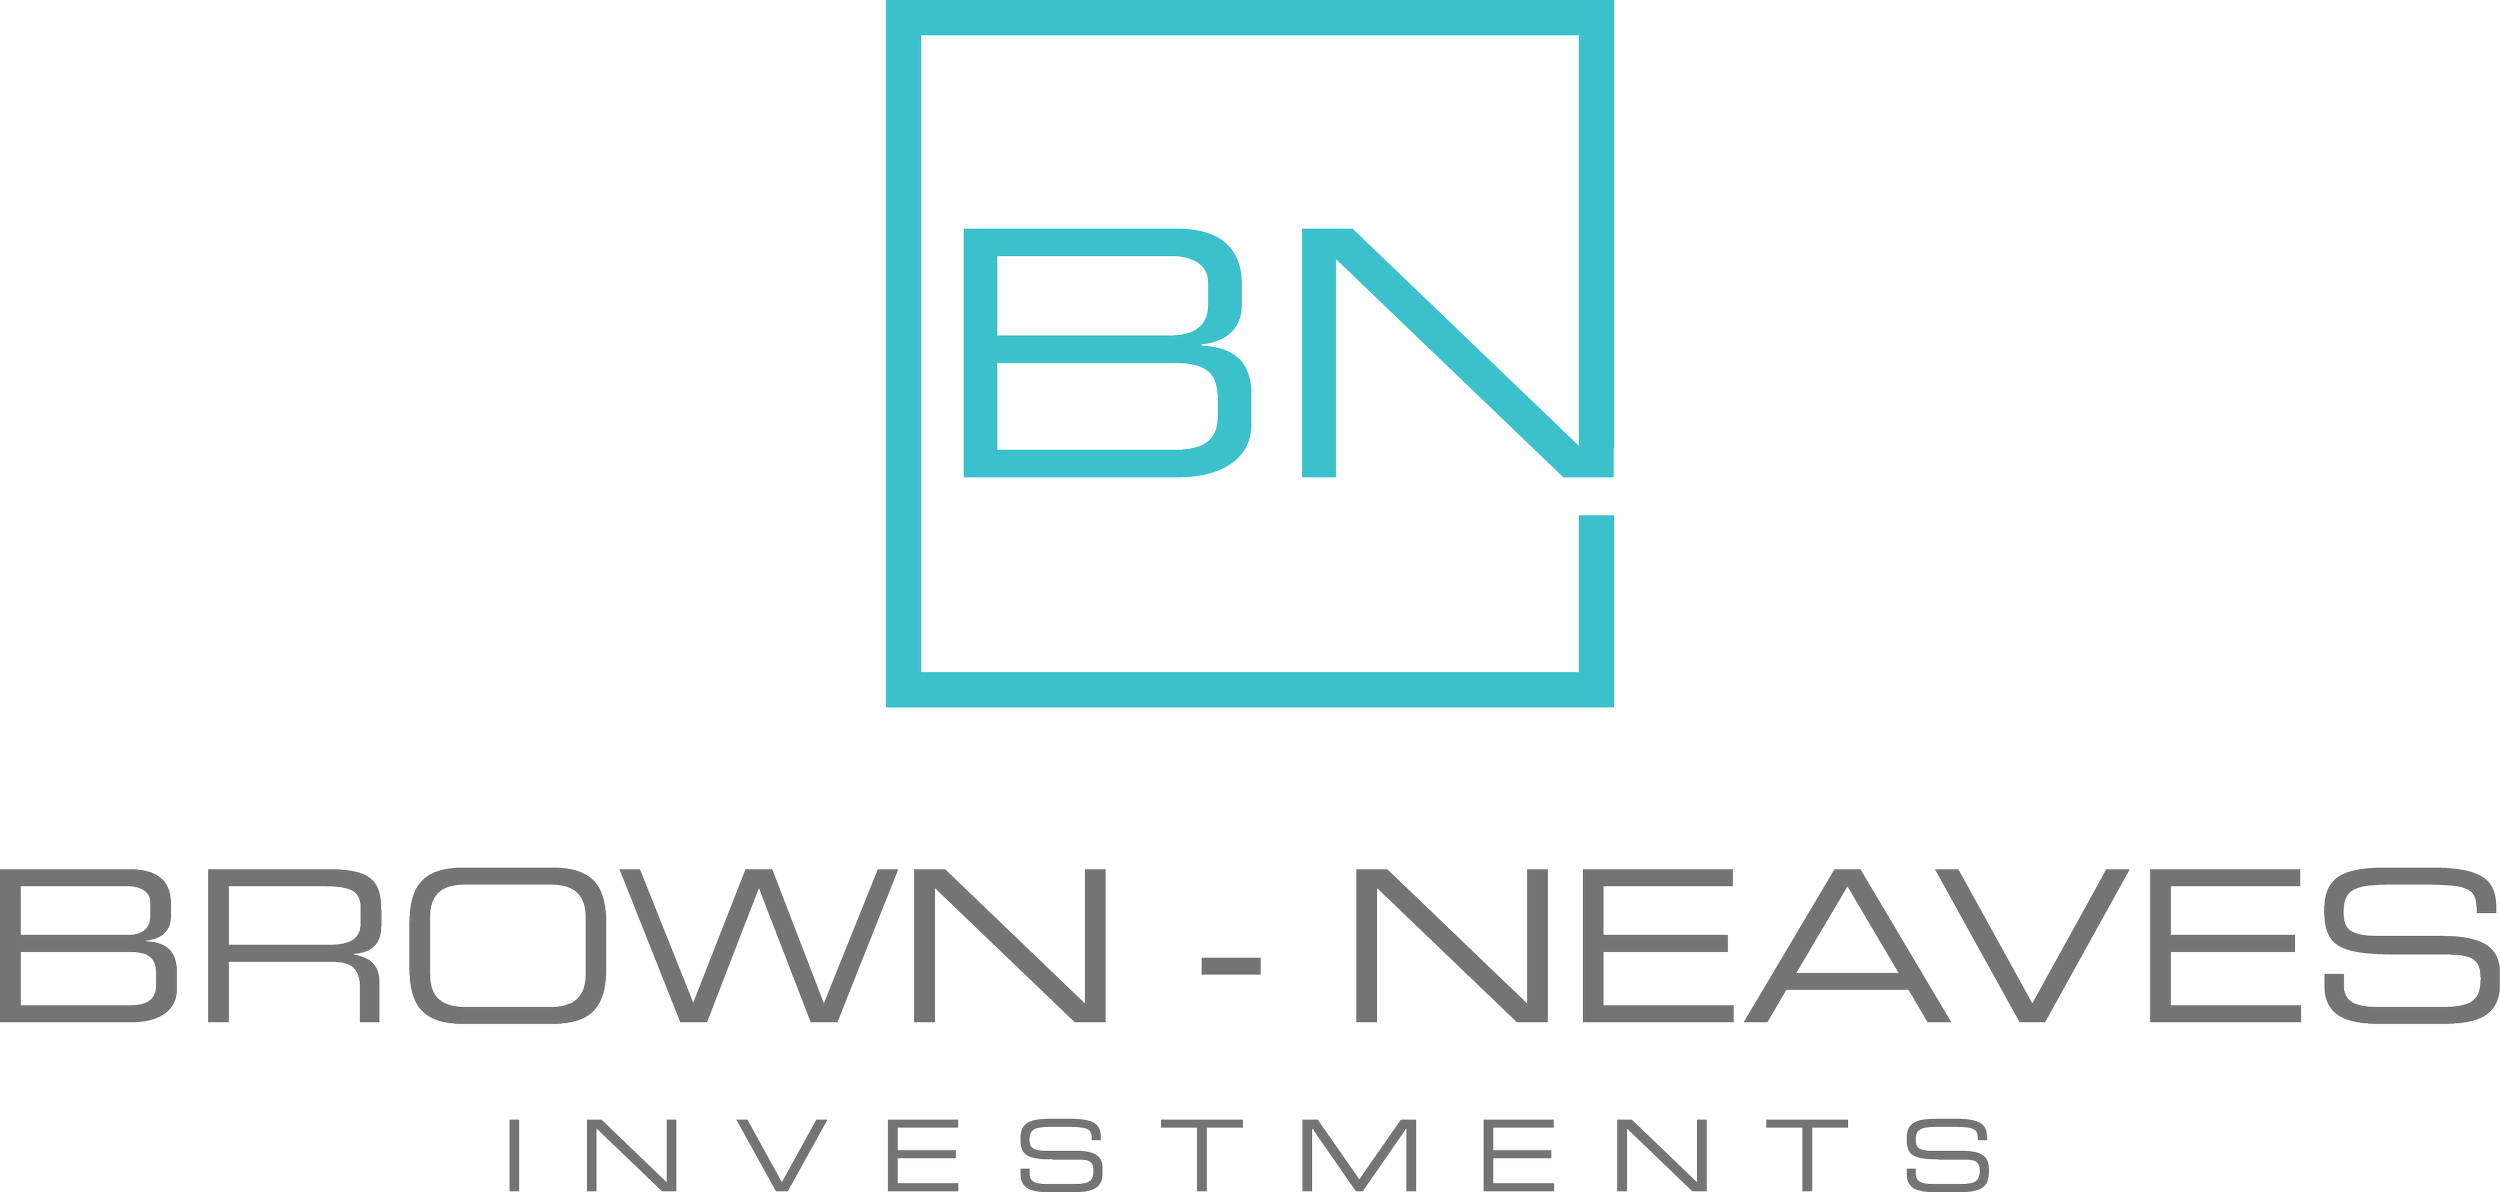 BN INVESTMENTS